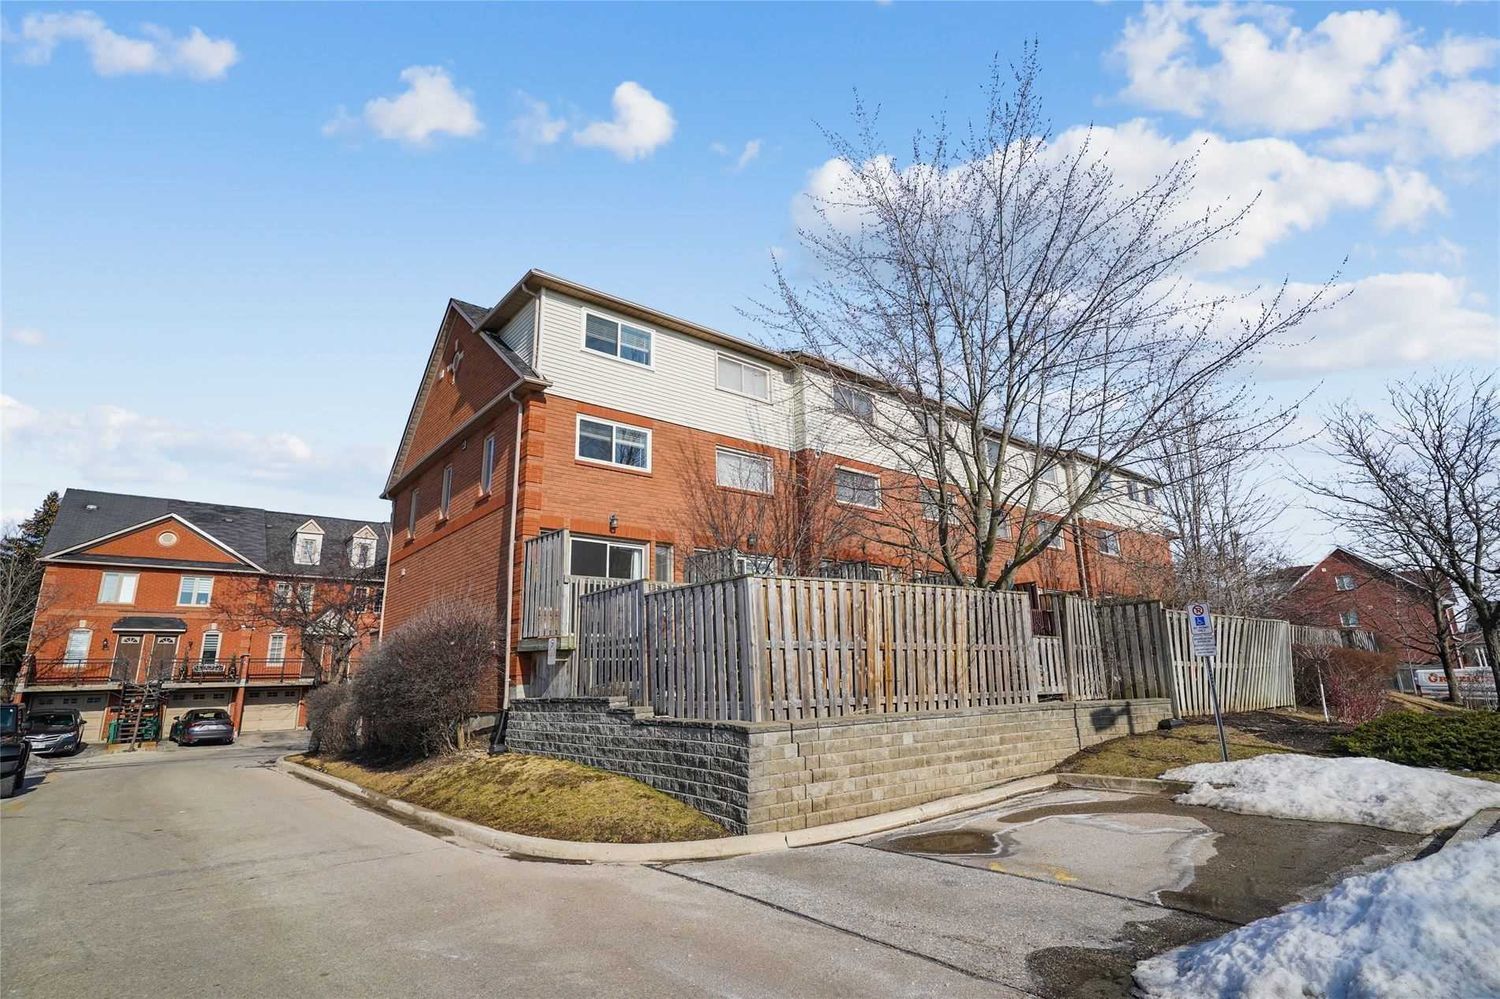 3895 Doug Leavens Boulevard. 3895 Doug Leavens Boulevard Townhomes is located in  Mississauga, Toronto - image #1 of 3